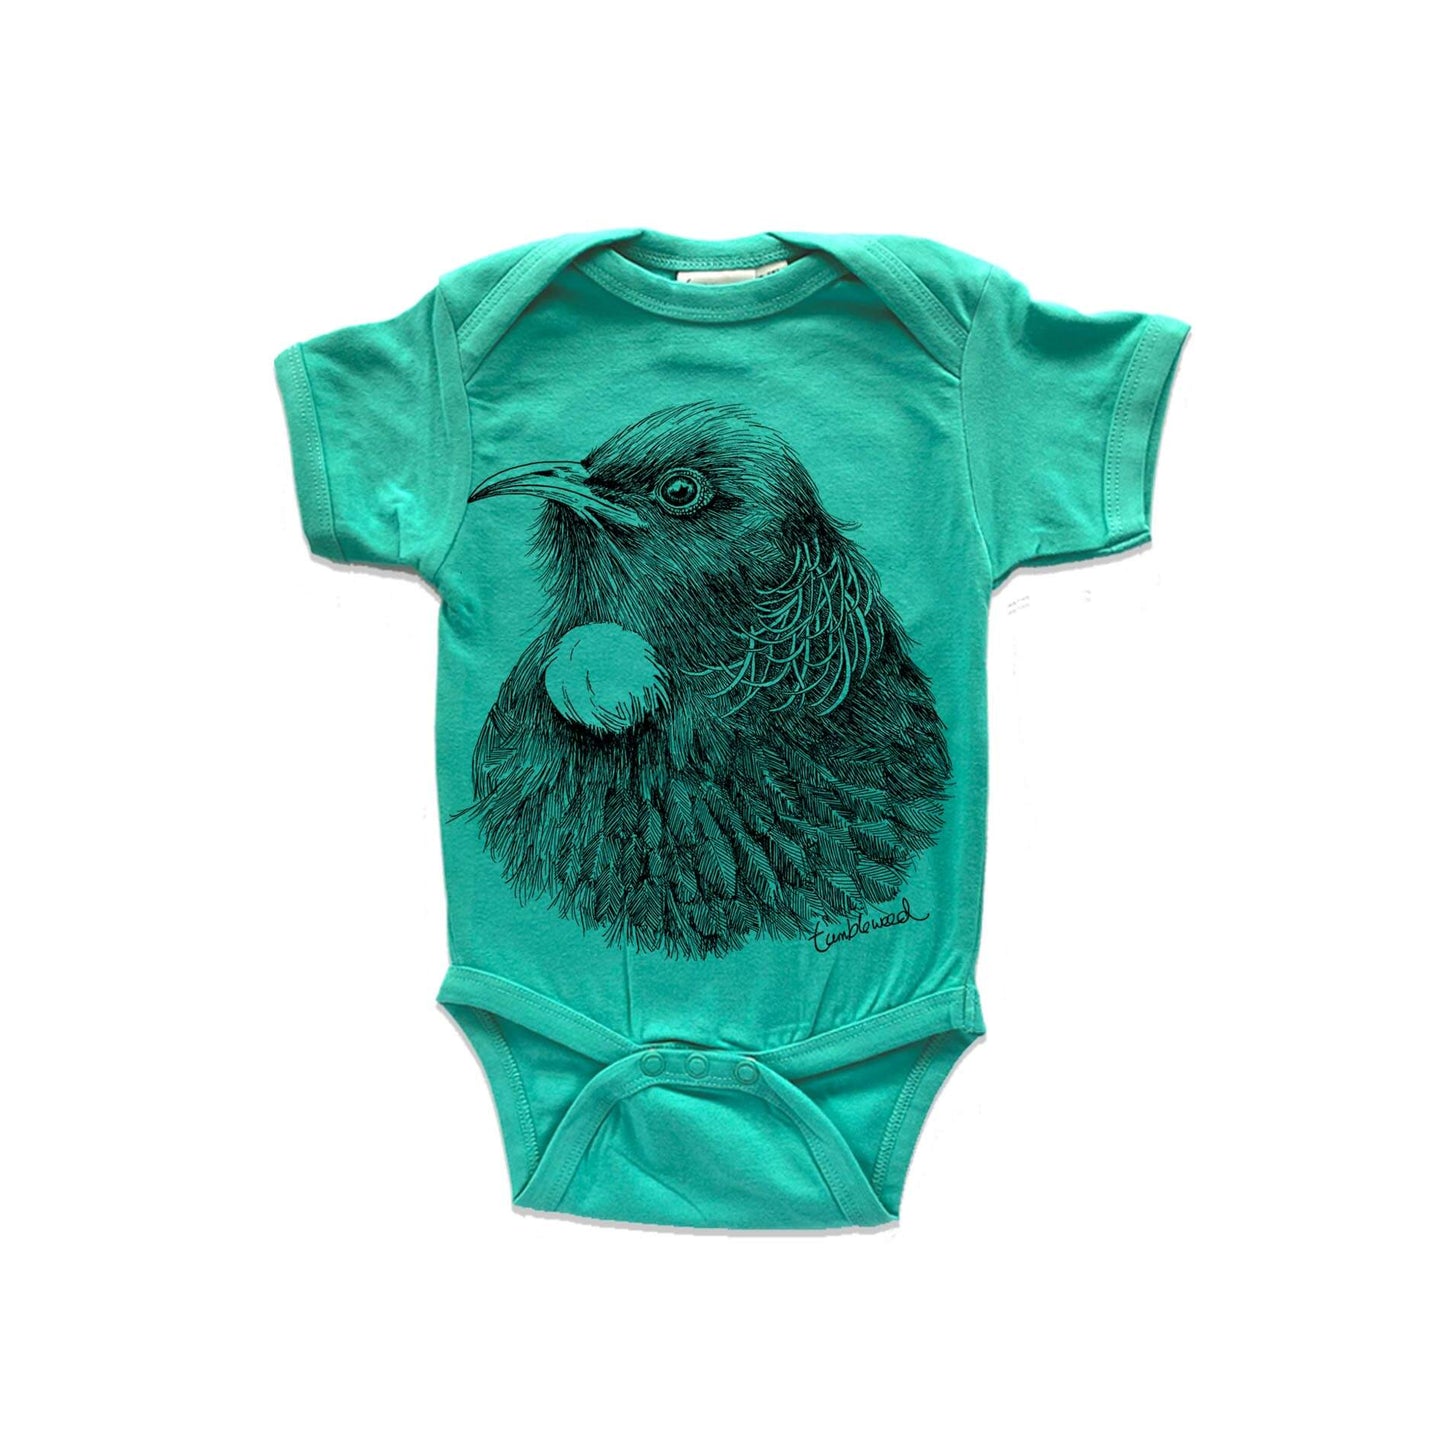 Short sleeved, marine, organic cotton, baby onesie featuring a screen printed Tui design.